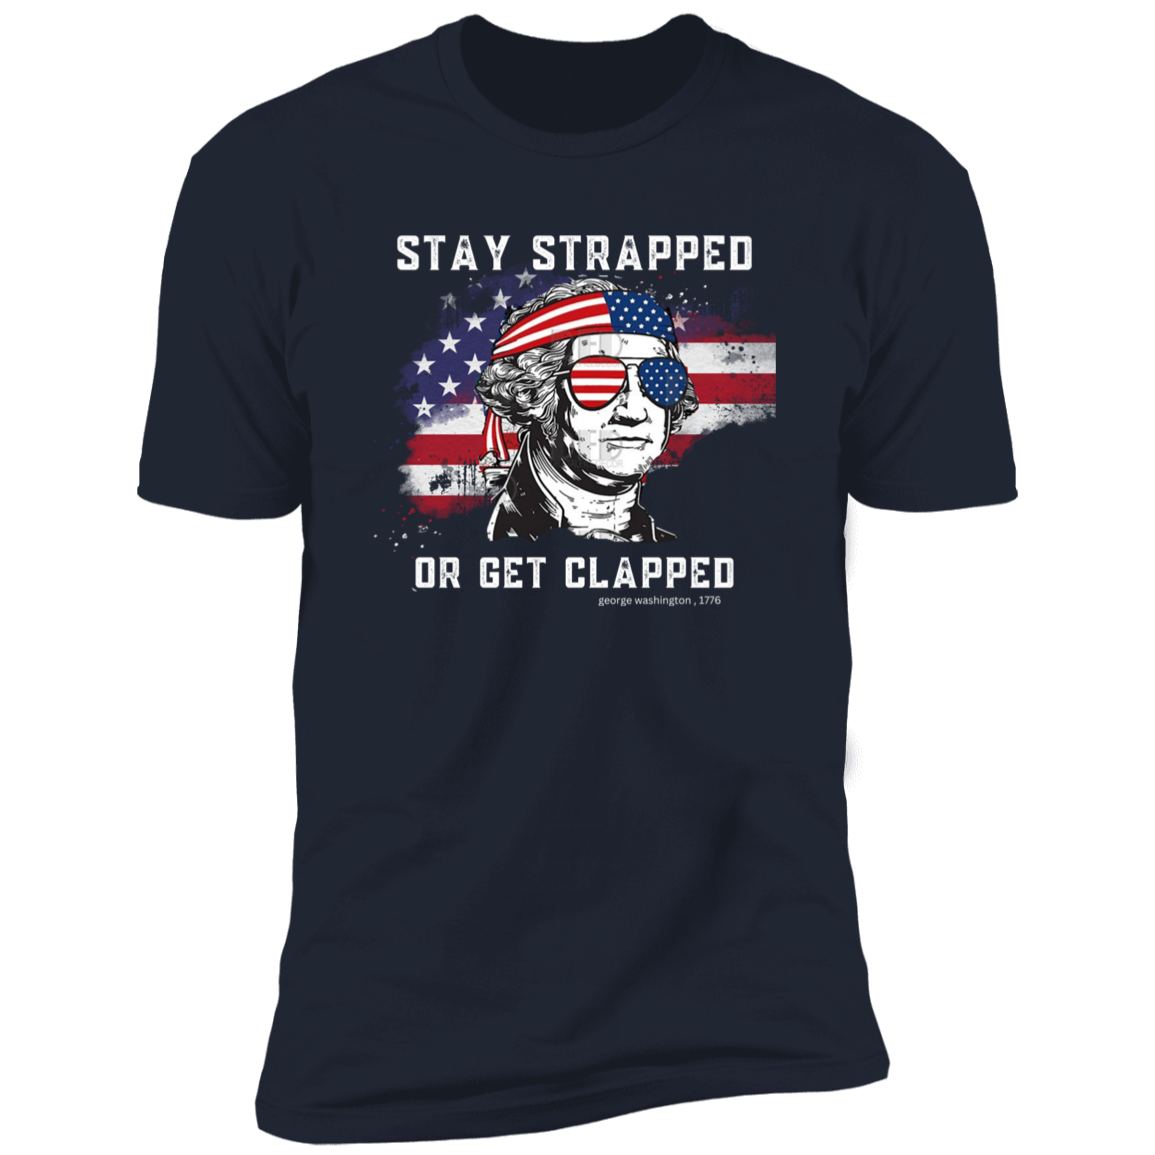 Summer Fun " Stay Strapped" Premium Short Sleeve T-Shirt